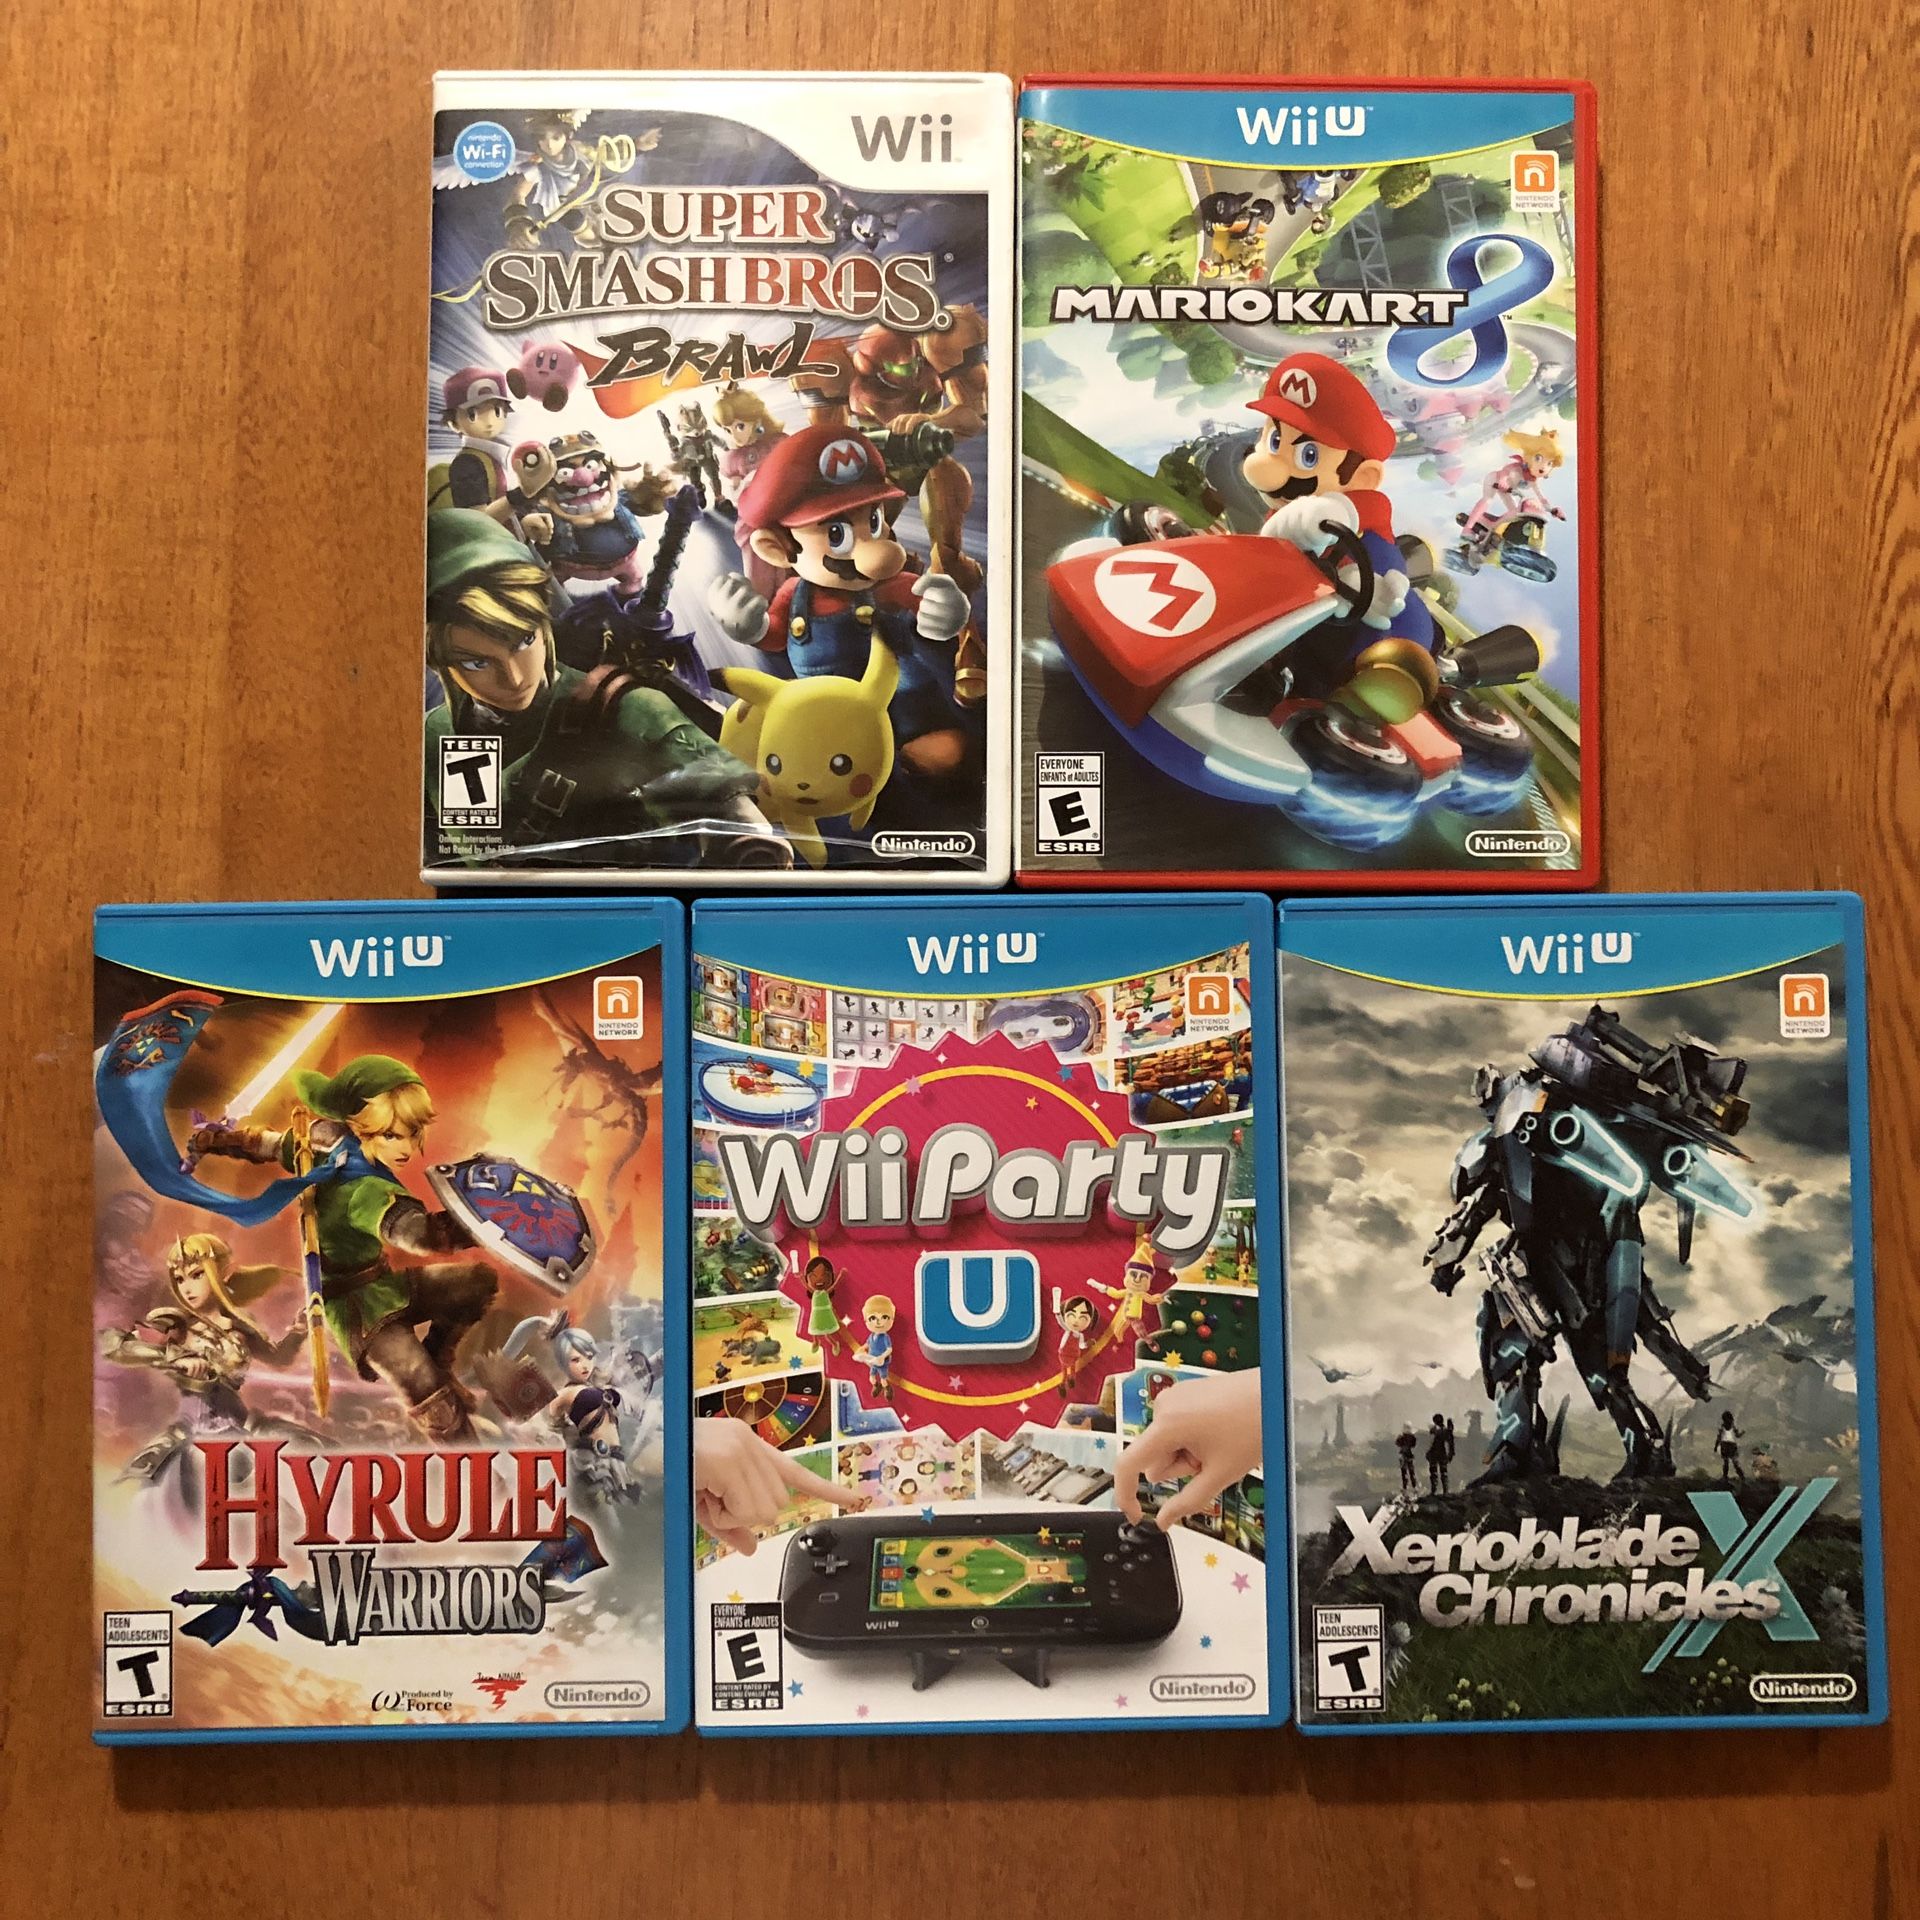 5 Wii and Wii U Games (Super Smash Bros Brawl, Mario Kart 8, Wii Party U, and more!)